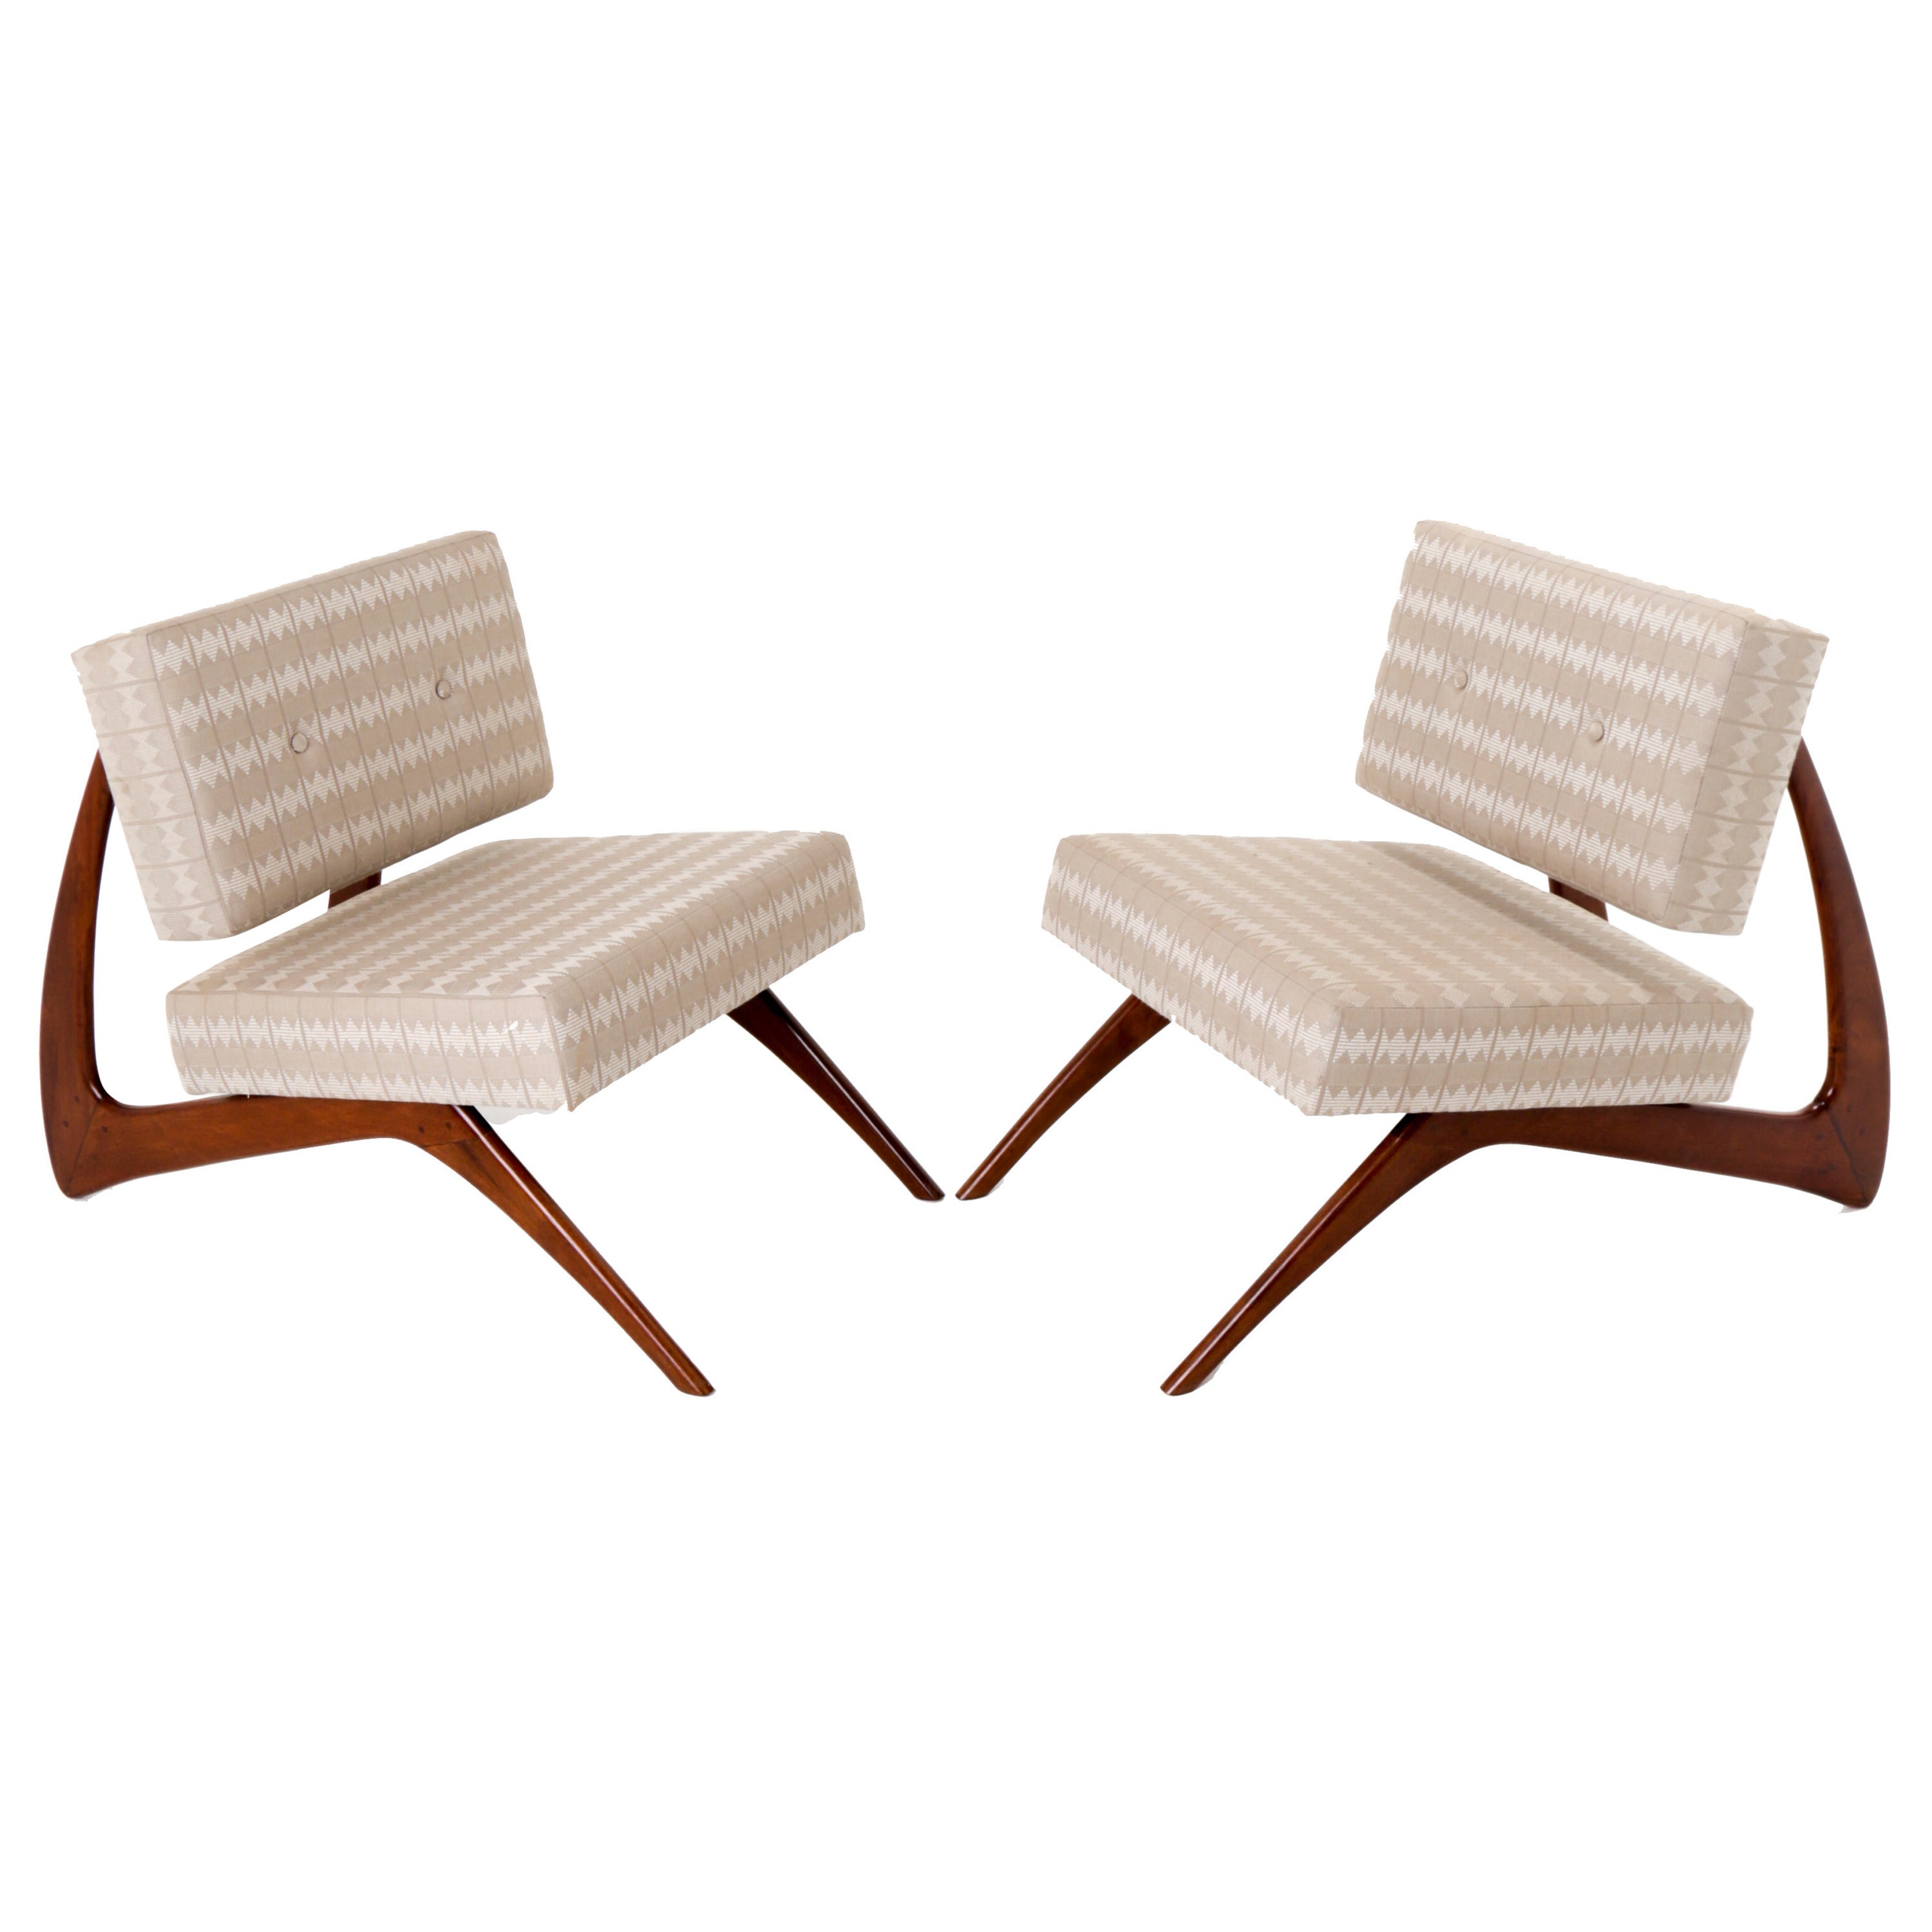 Pair of Sculptural Caviuna Chairs from Brazil